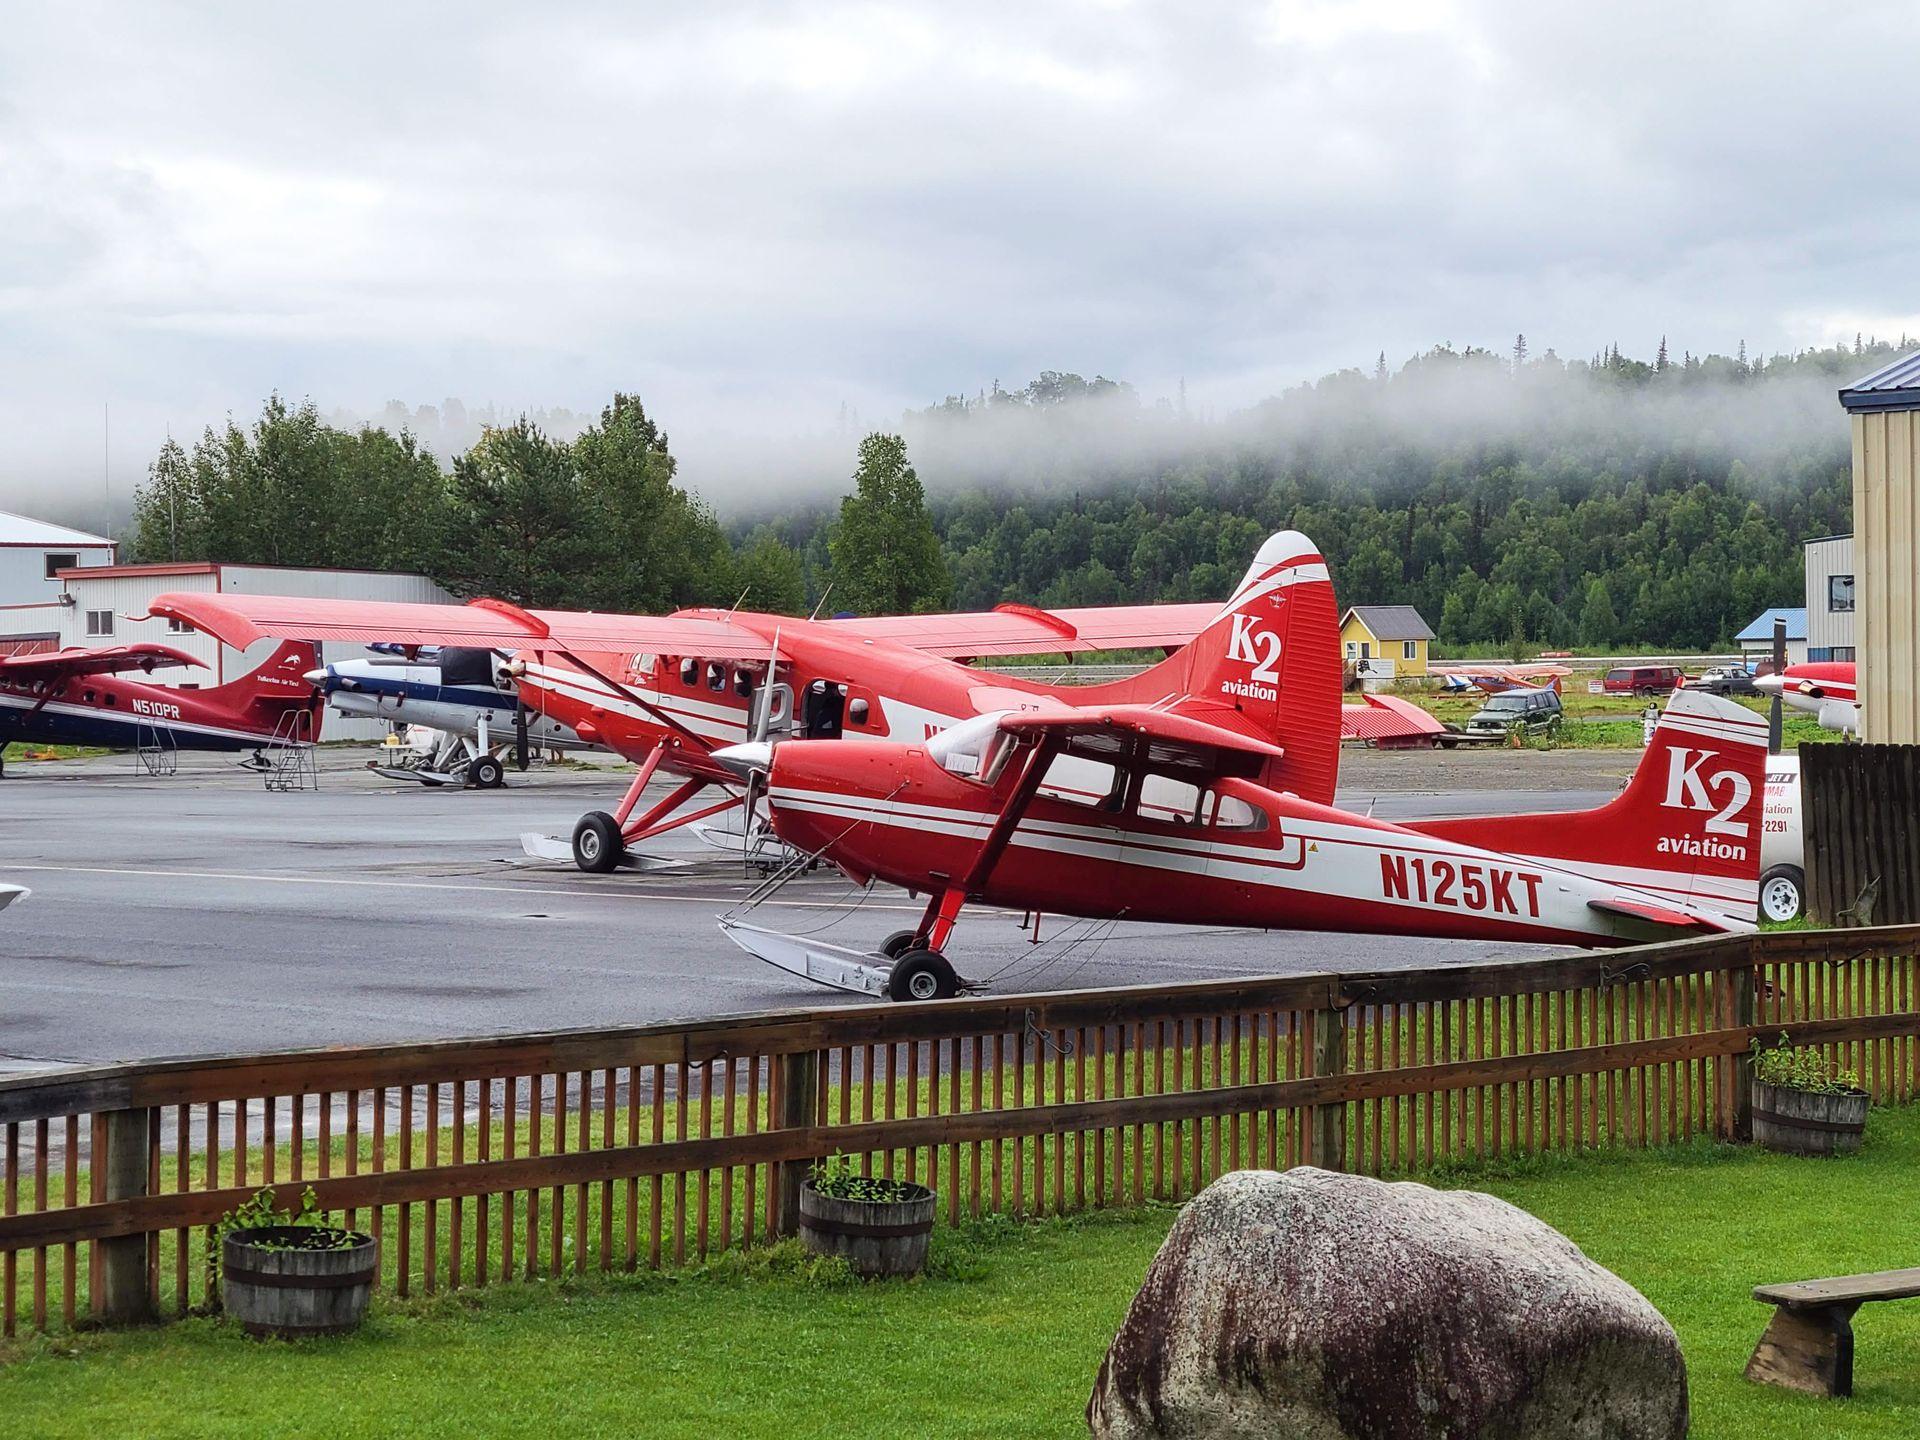 Red and white planes parked at K2 Aviation in Talkeetna.